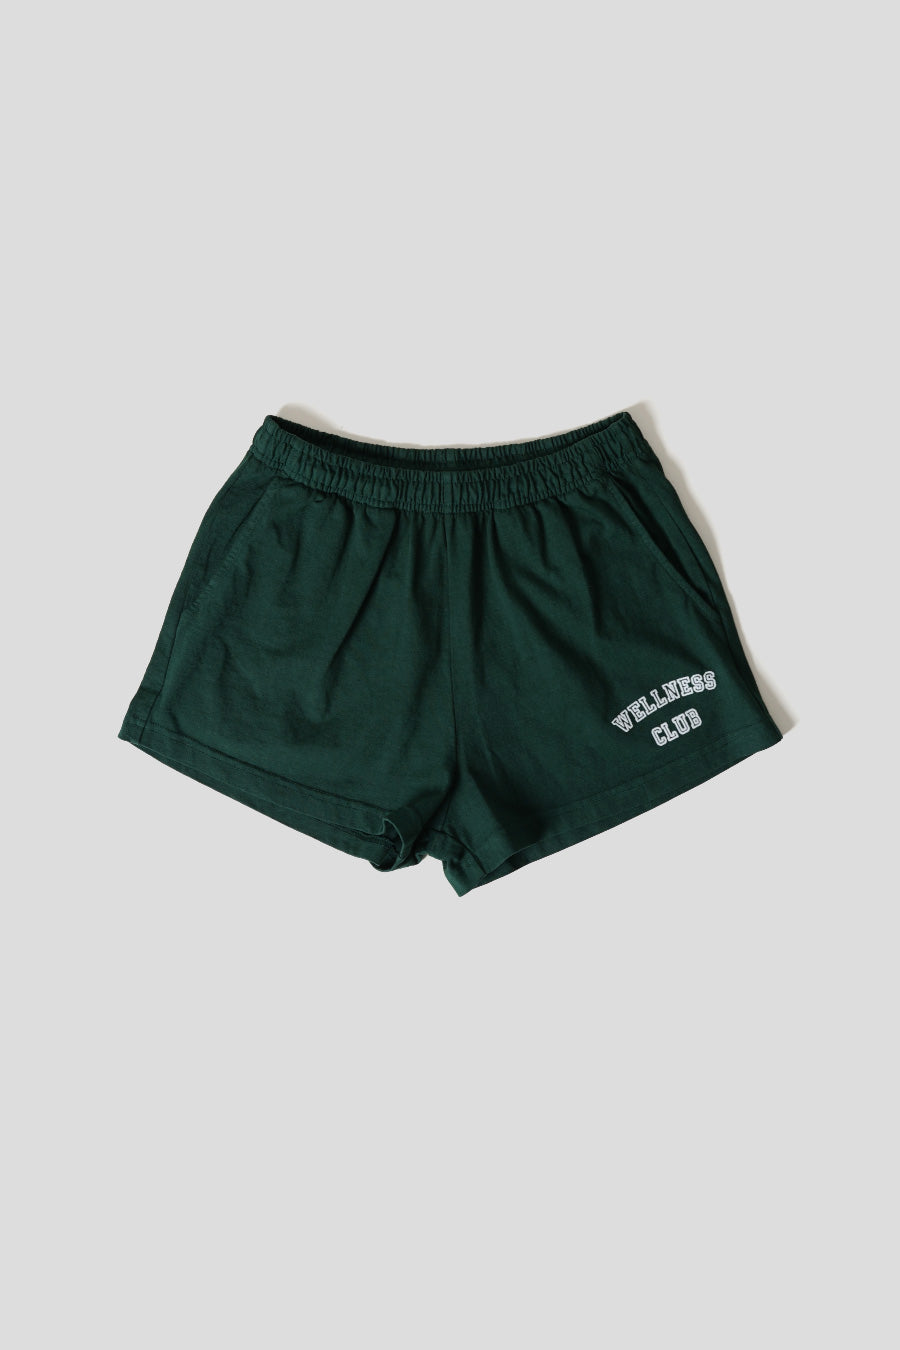 Sporty & Rich - WELLNESS CLUB SHORTS FLOCKED DISCO FOREST GREEN - LE LABO STORE